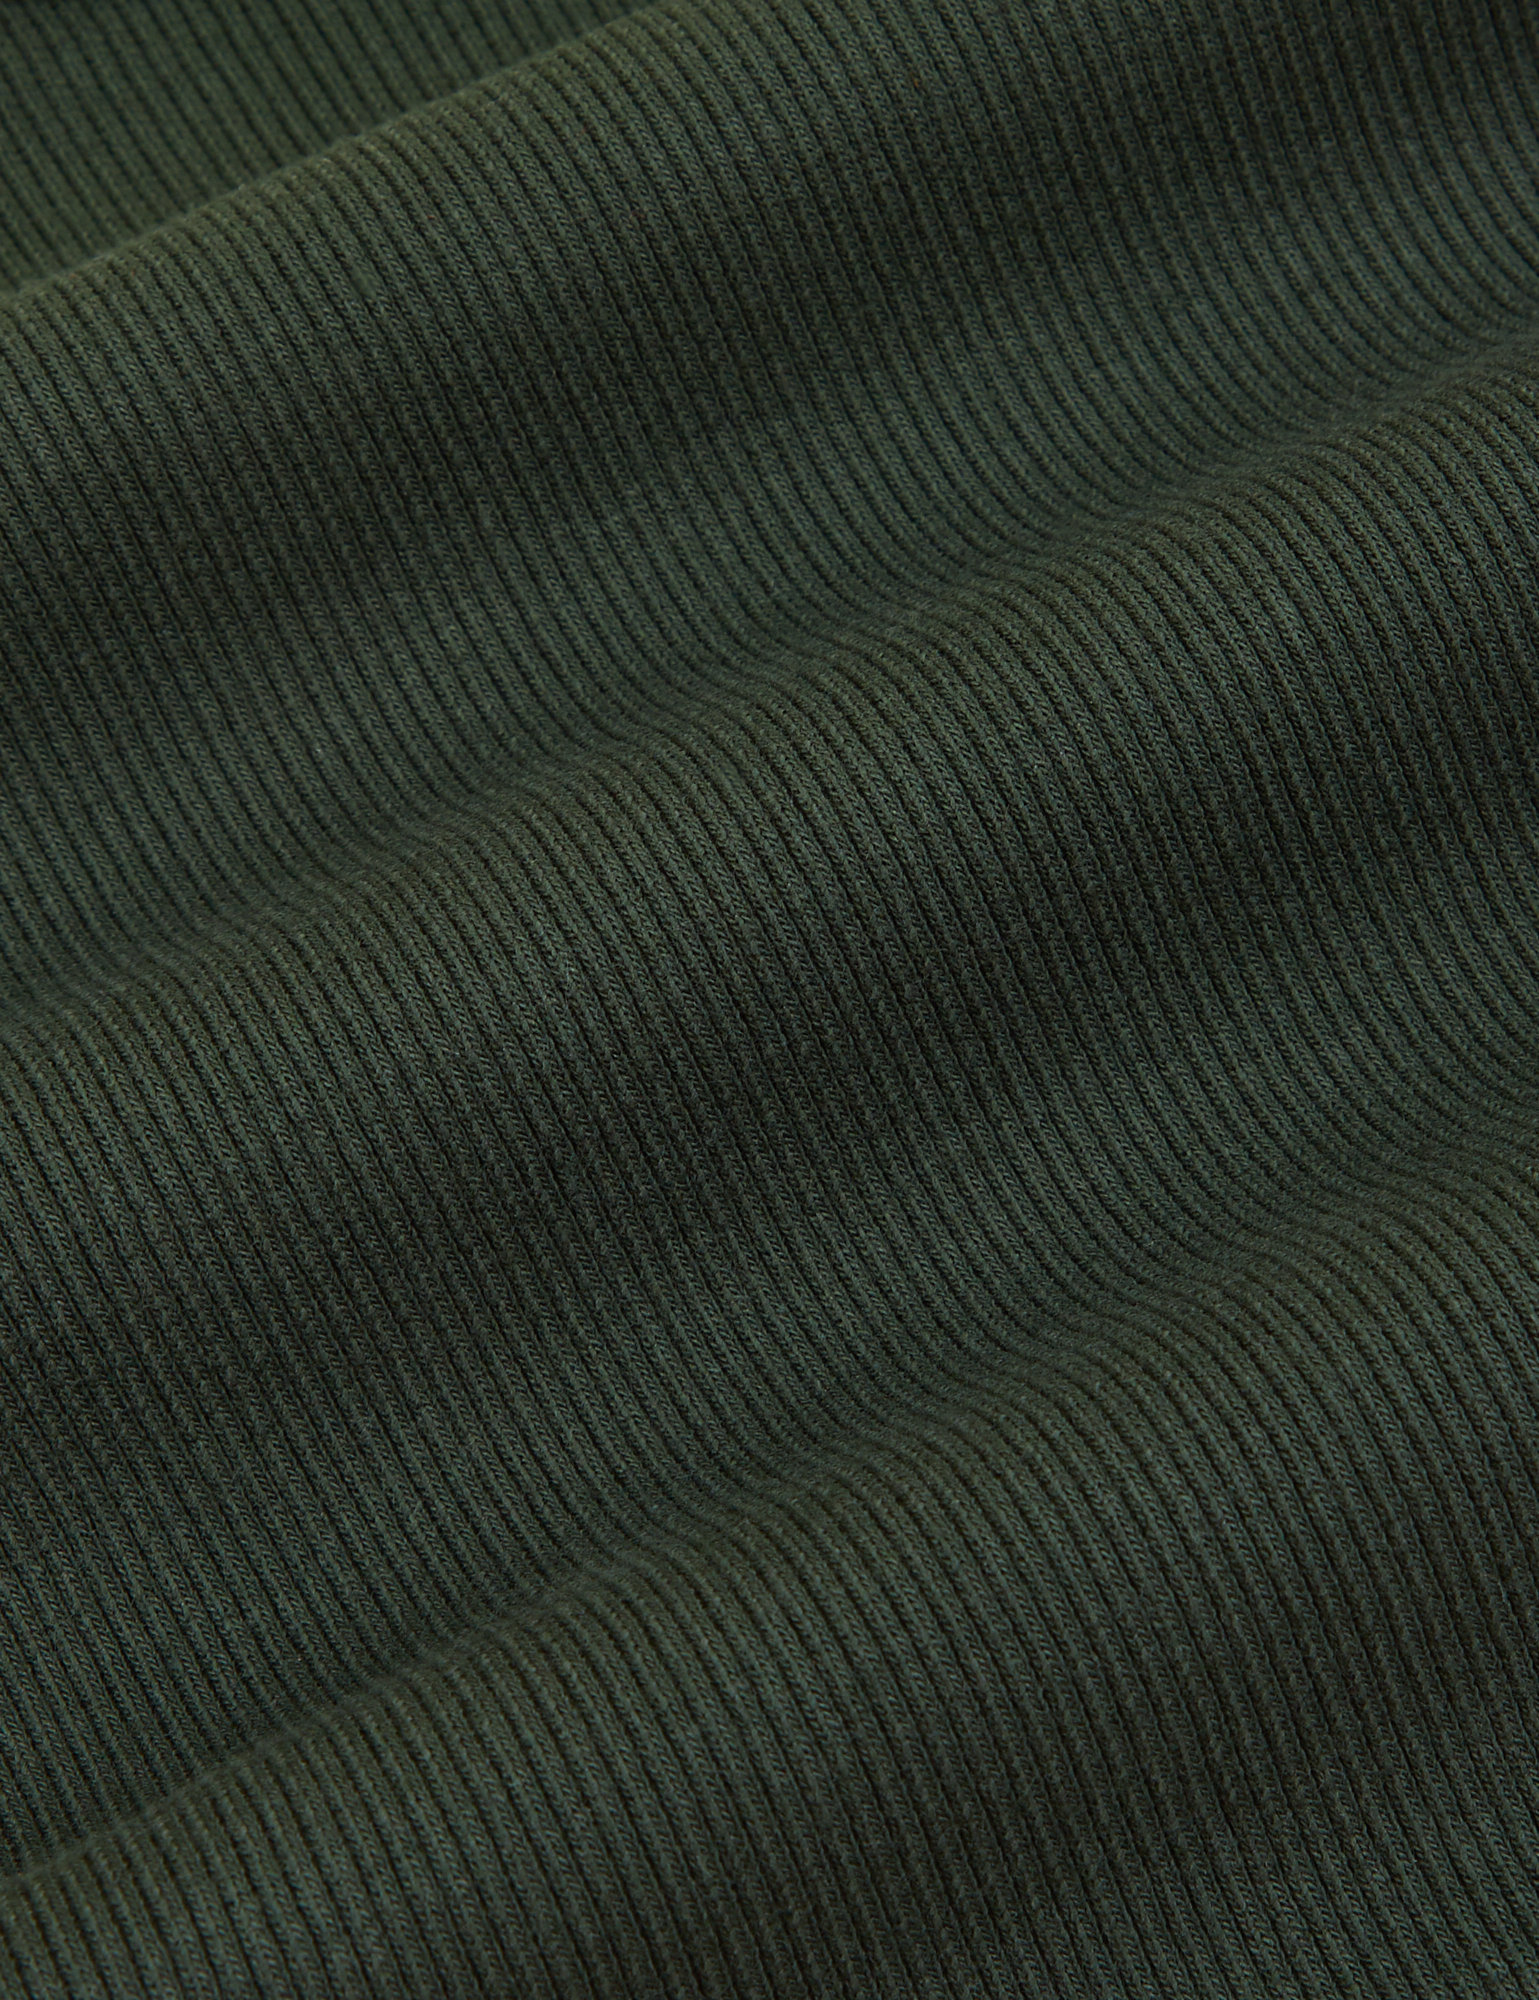 Square Neck Tank in Swamp Green fabric detail close up